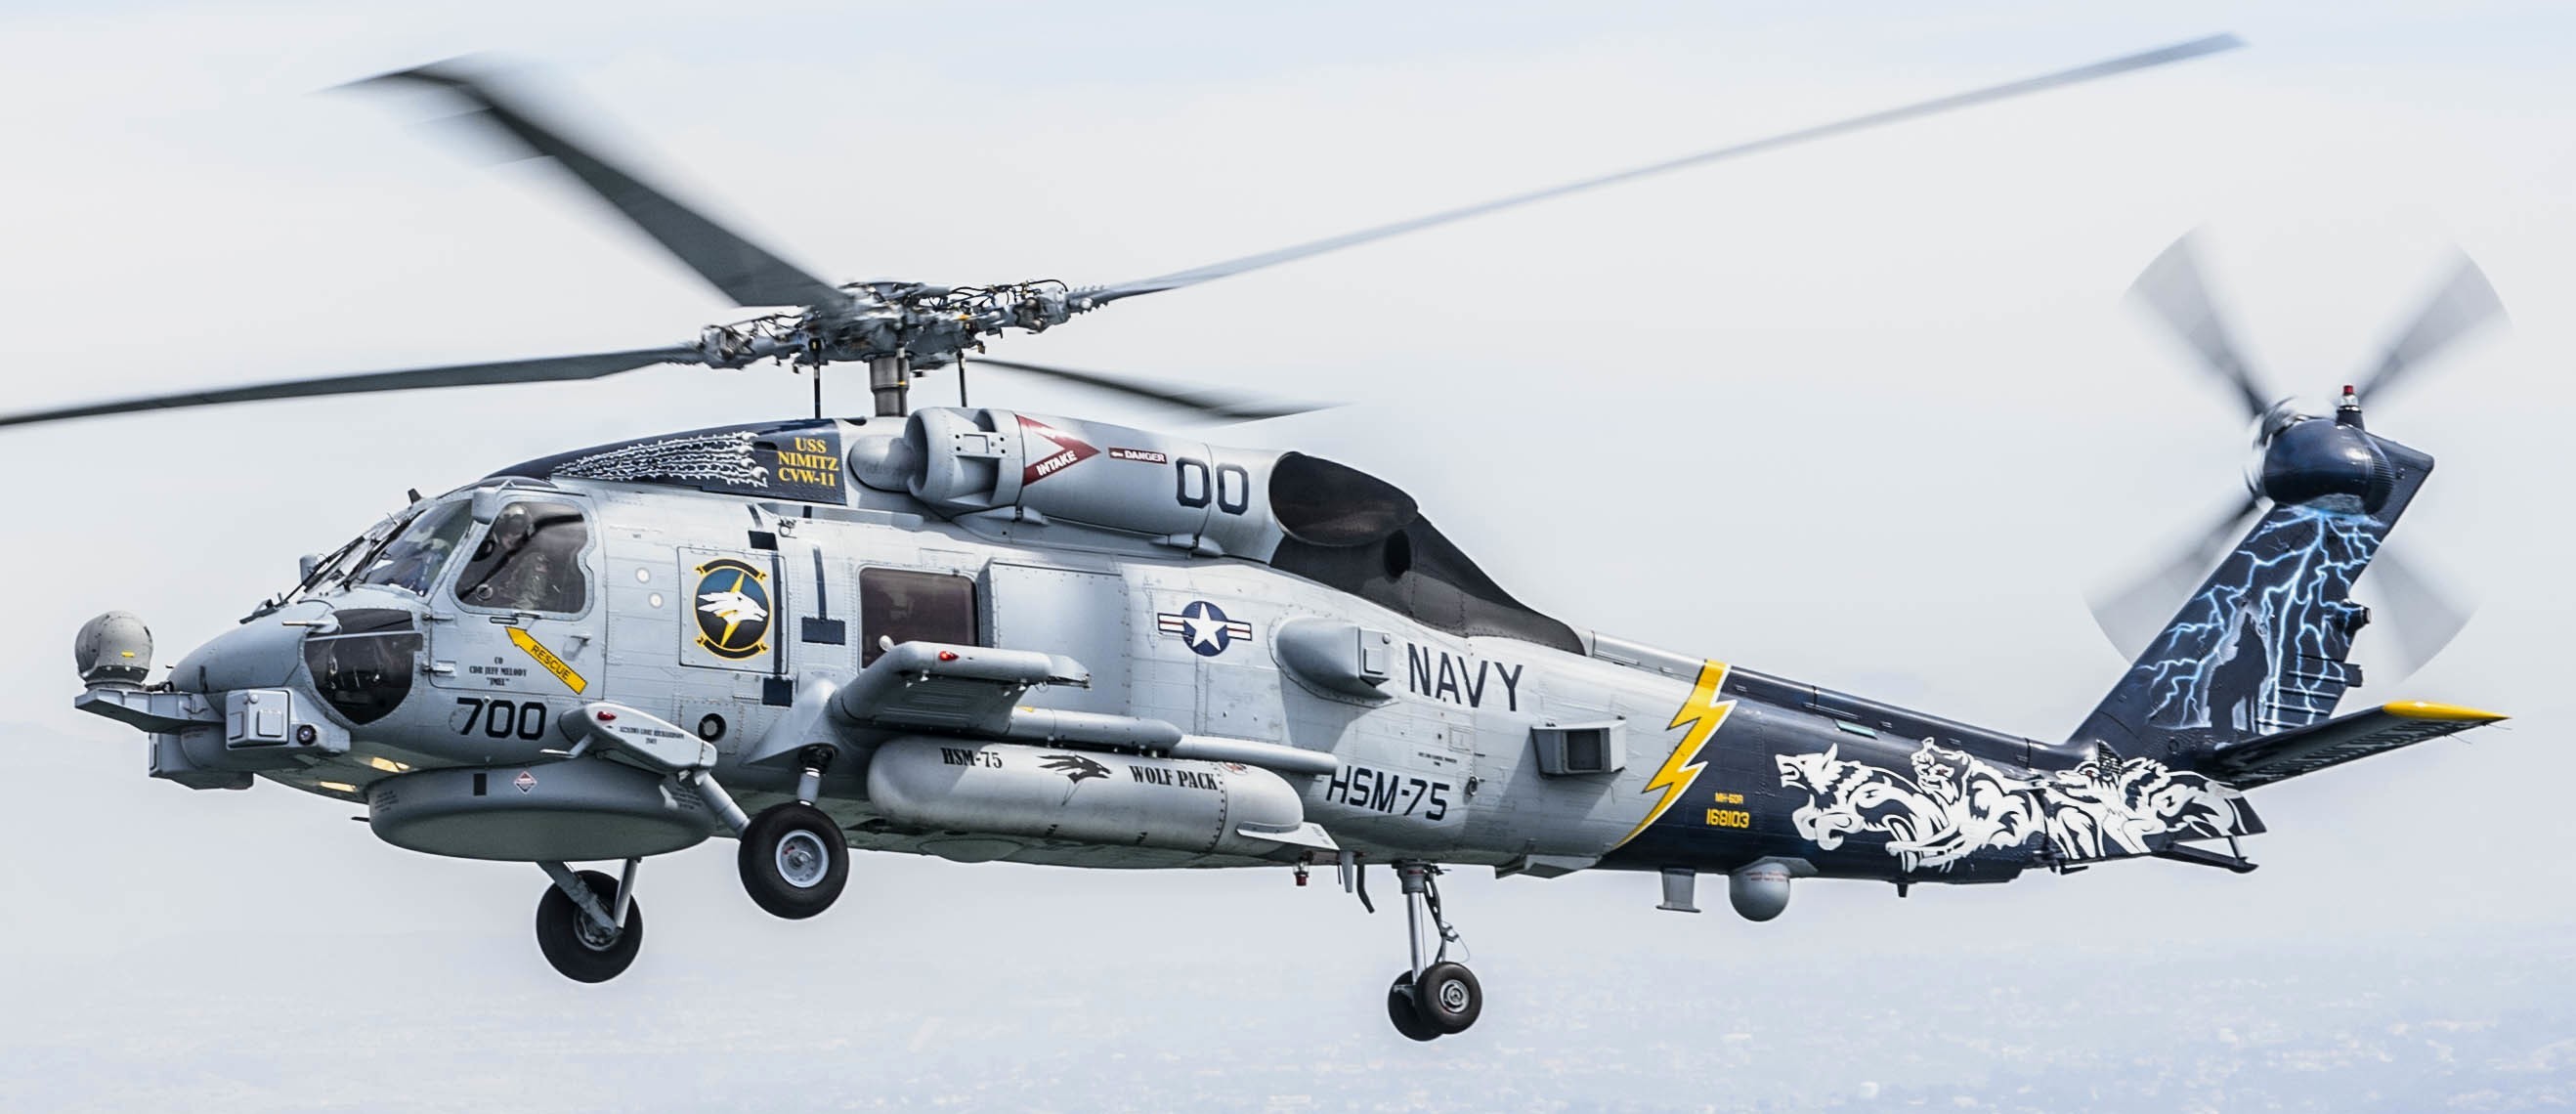 hsm-75 wolfpack helicopter maritime strike squadron us navy mh-60r seahawk 2016 42